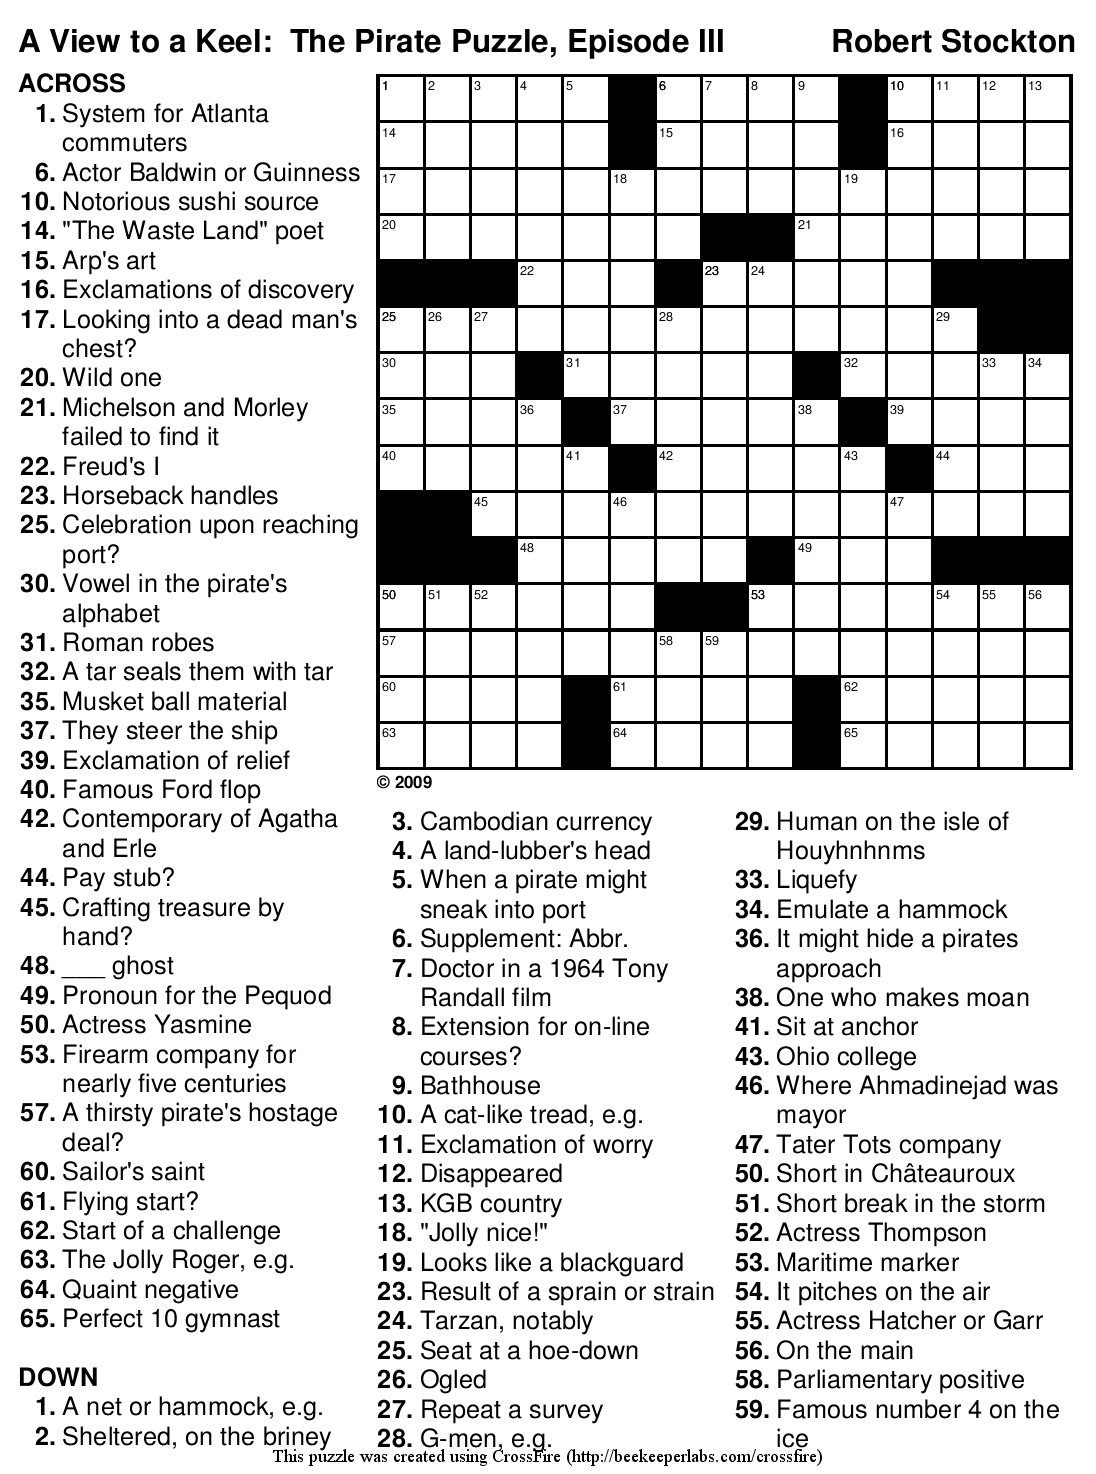 All About Free Daily Printable Crossword Puzzles Onlinecrosswordsnet - Free Daily Online Printable Crossword Puzzles